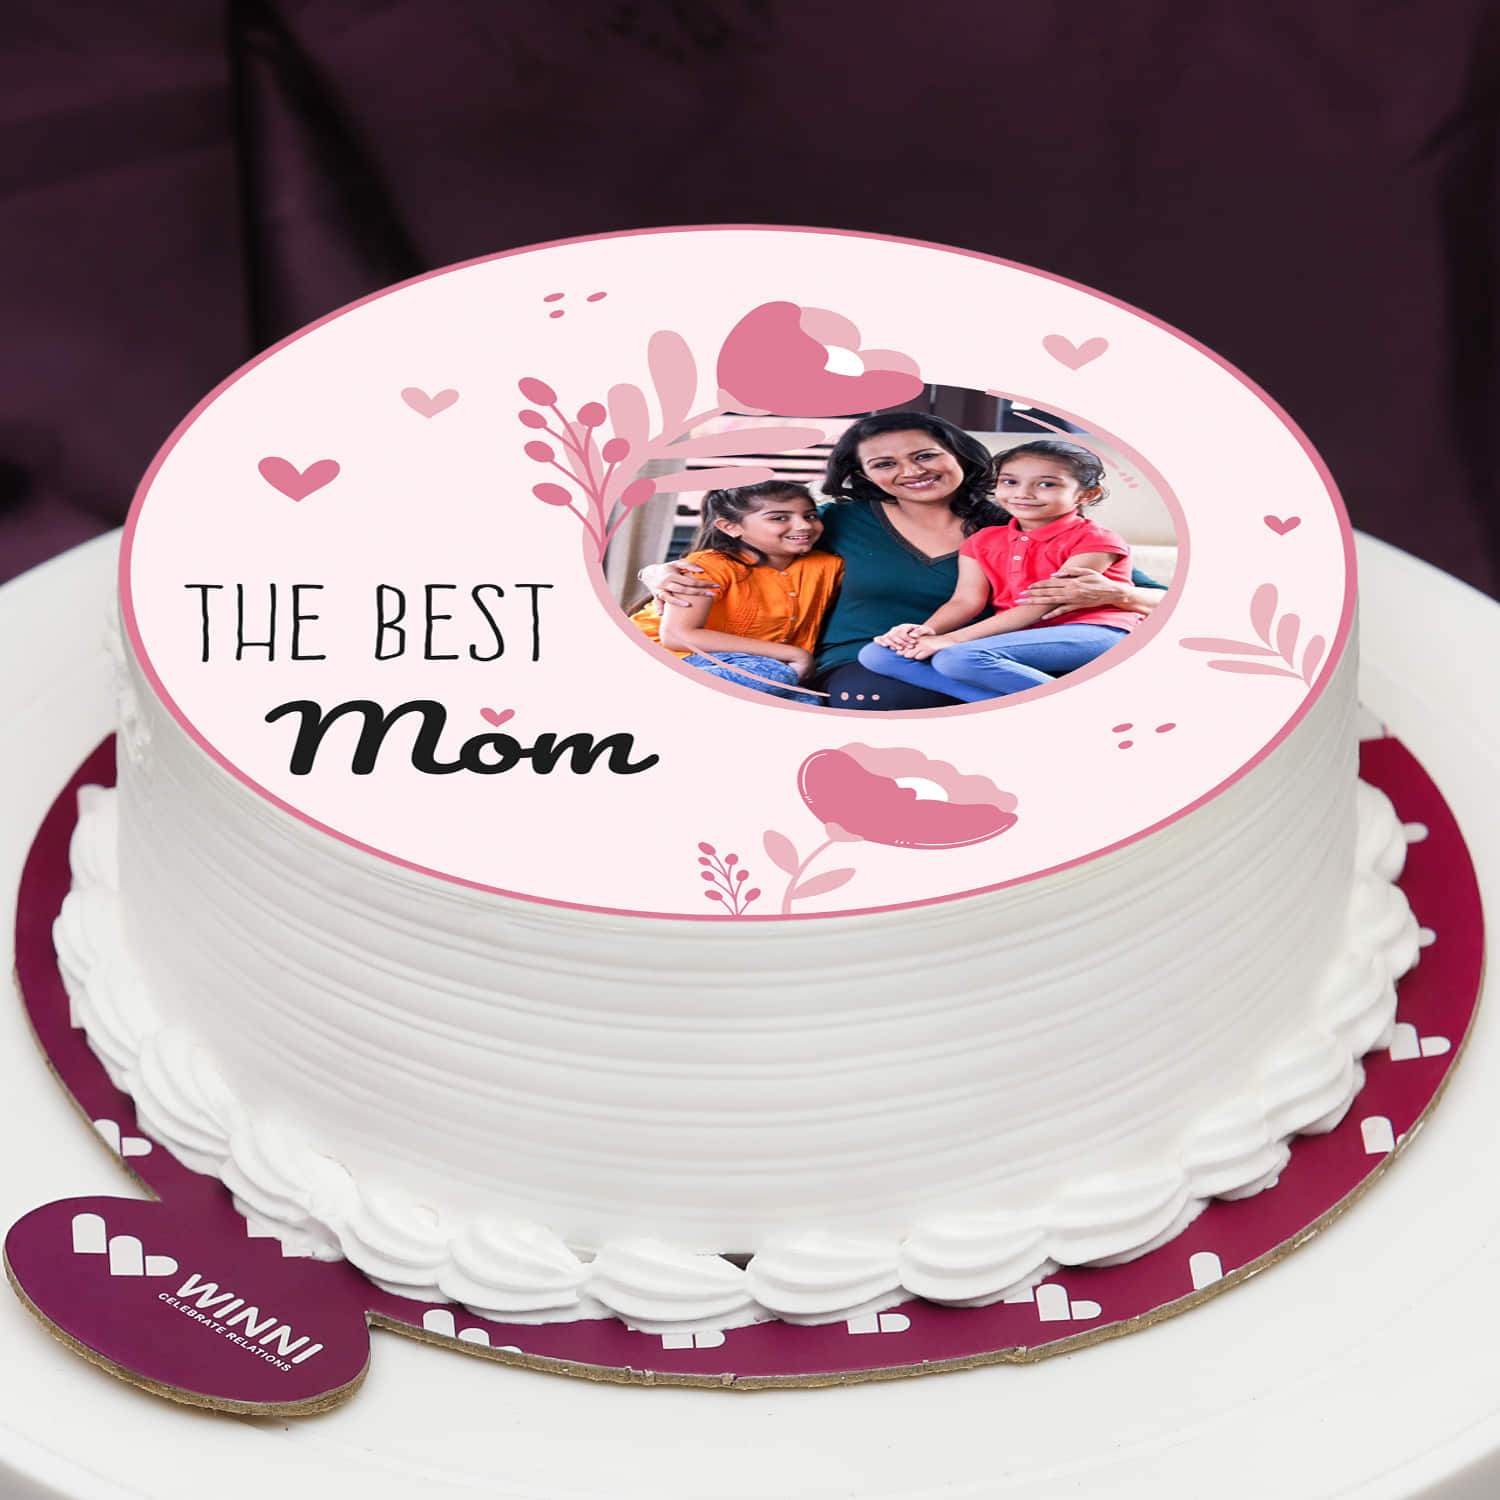 Send Best Mom Chocolate Cake Online in India at Indiagift.in